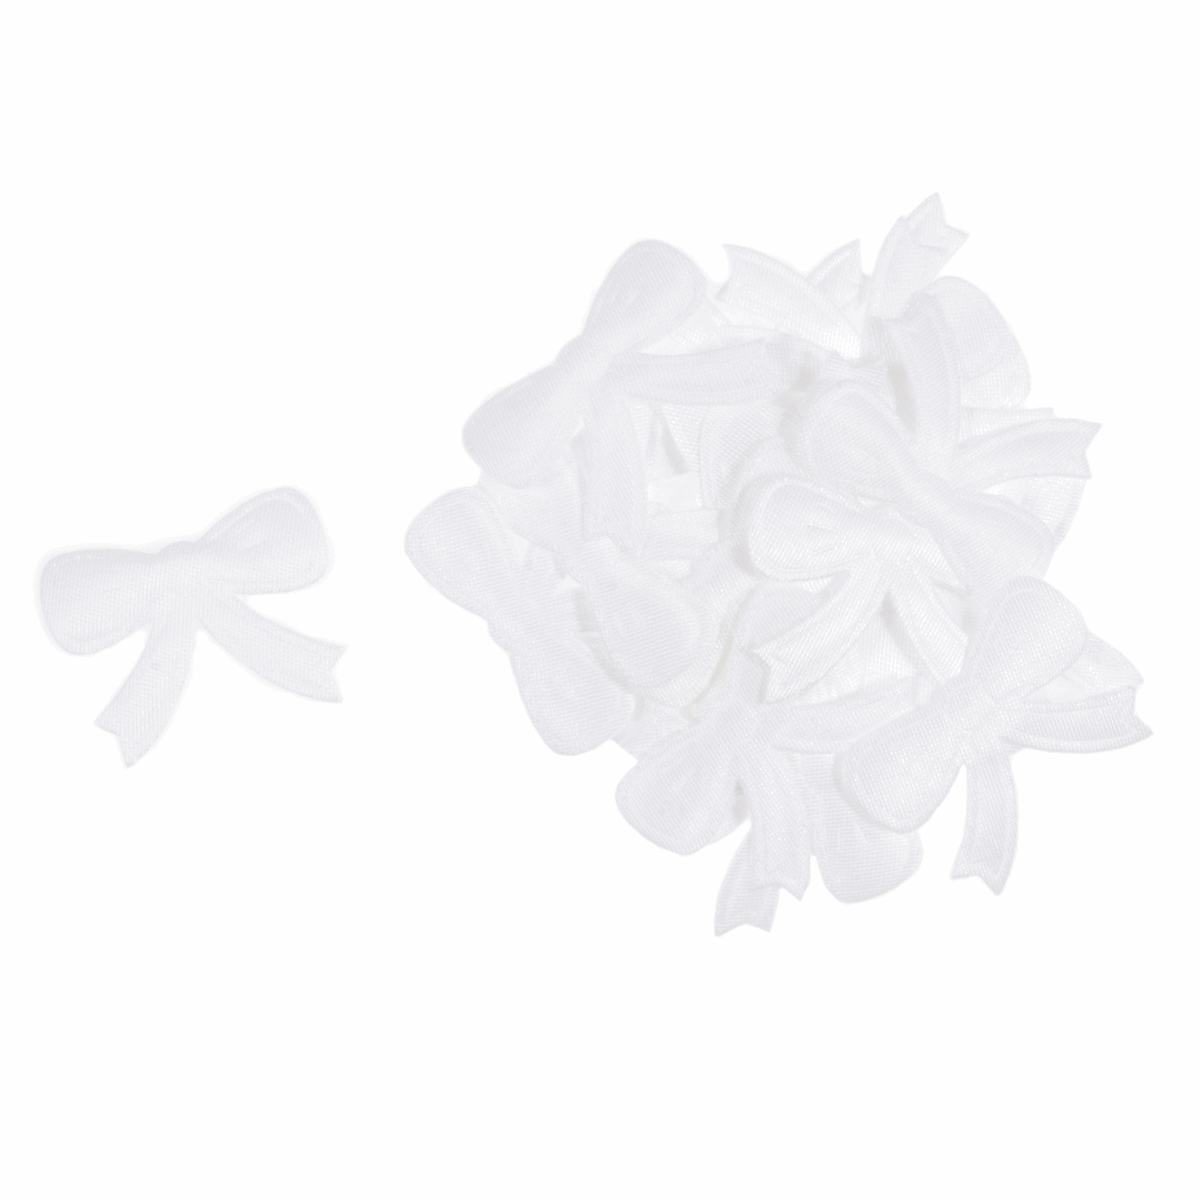 Craft Embellishments: Flat Satin Bows: White - Pack of 70